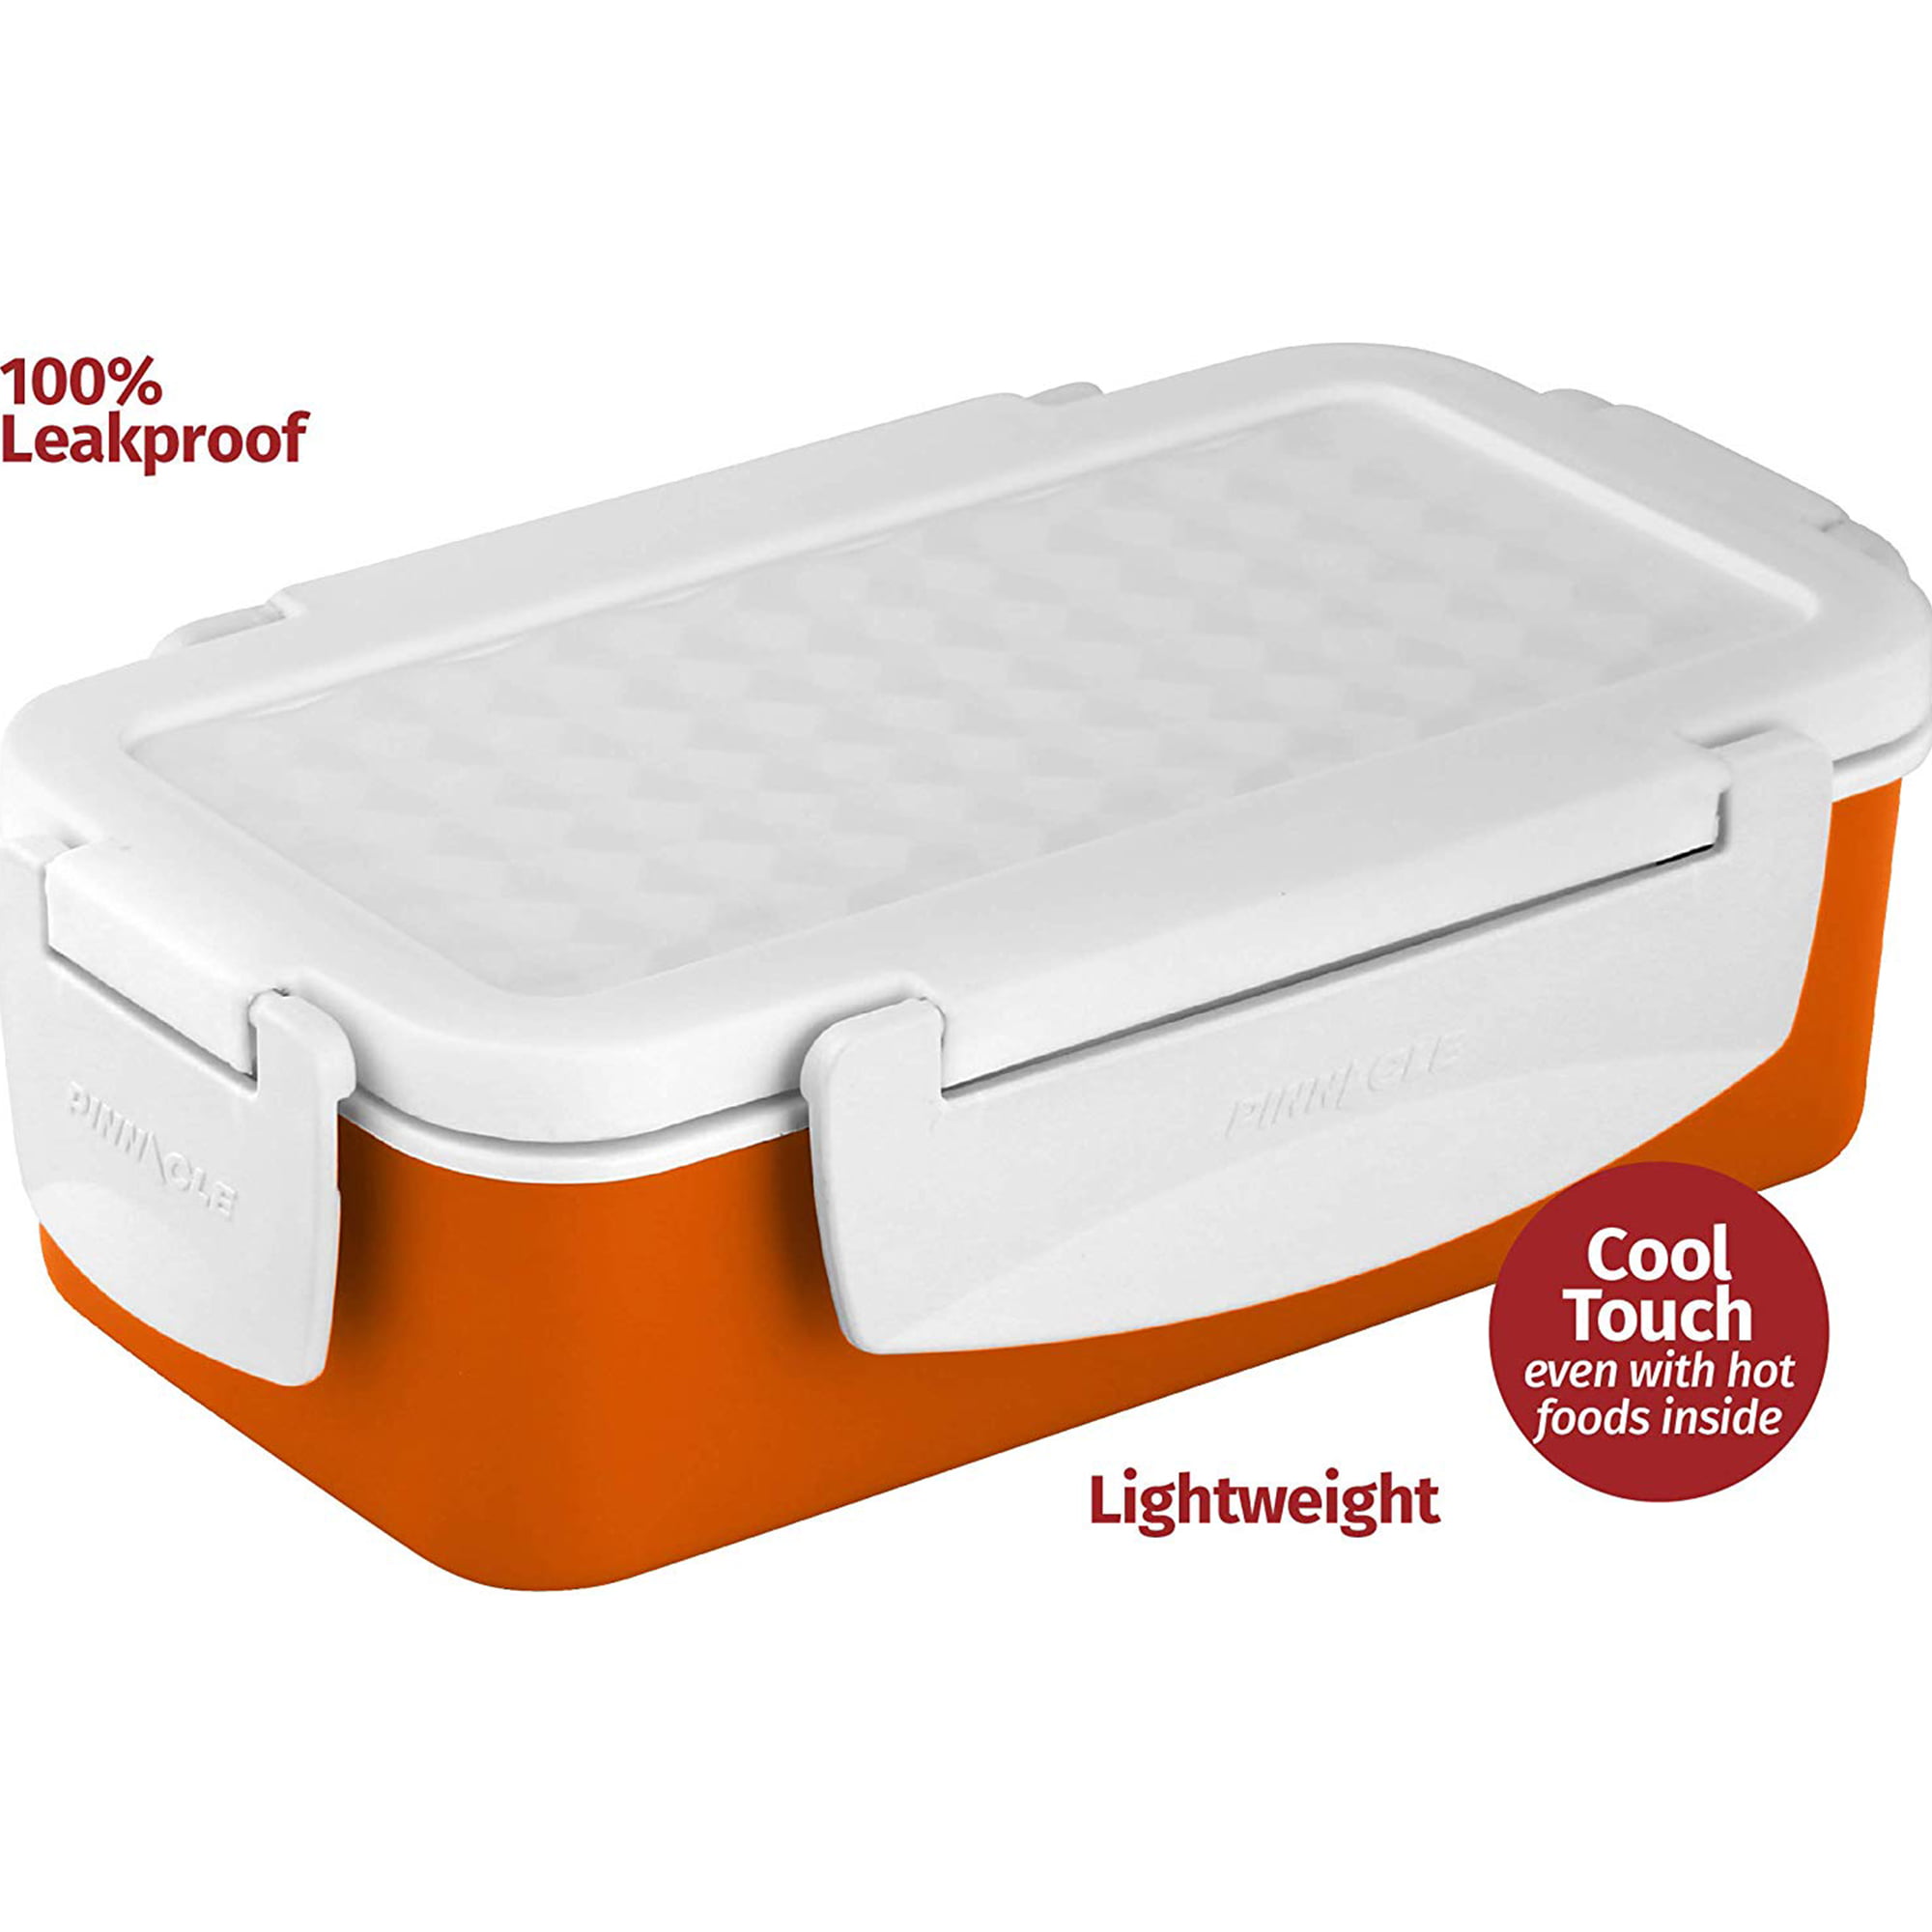 Lunch Box ~ Pinnacle Insulated Leak Proof Lunch Box for Adults and Kids -  Thermal Lunch Container Wi…See more Lunch Box ~ Pinnacle Insulated Leak